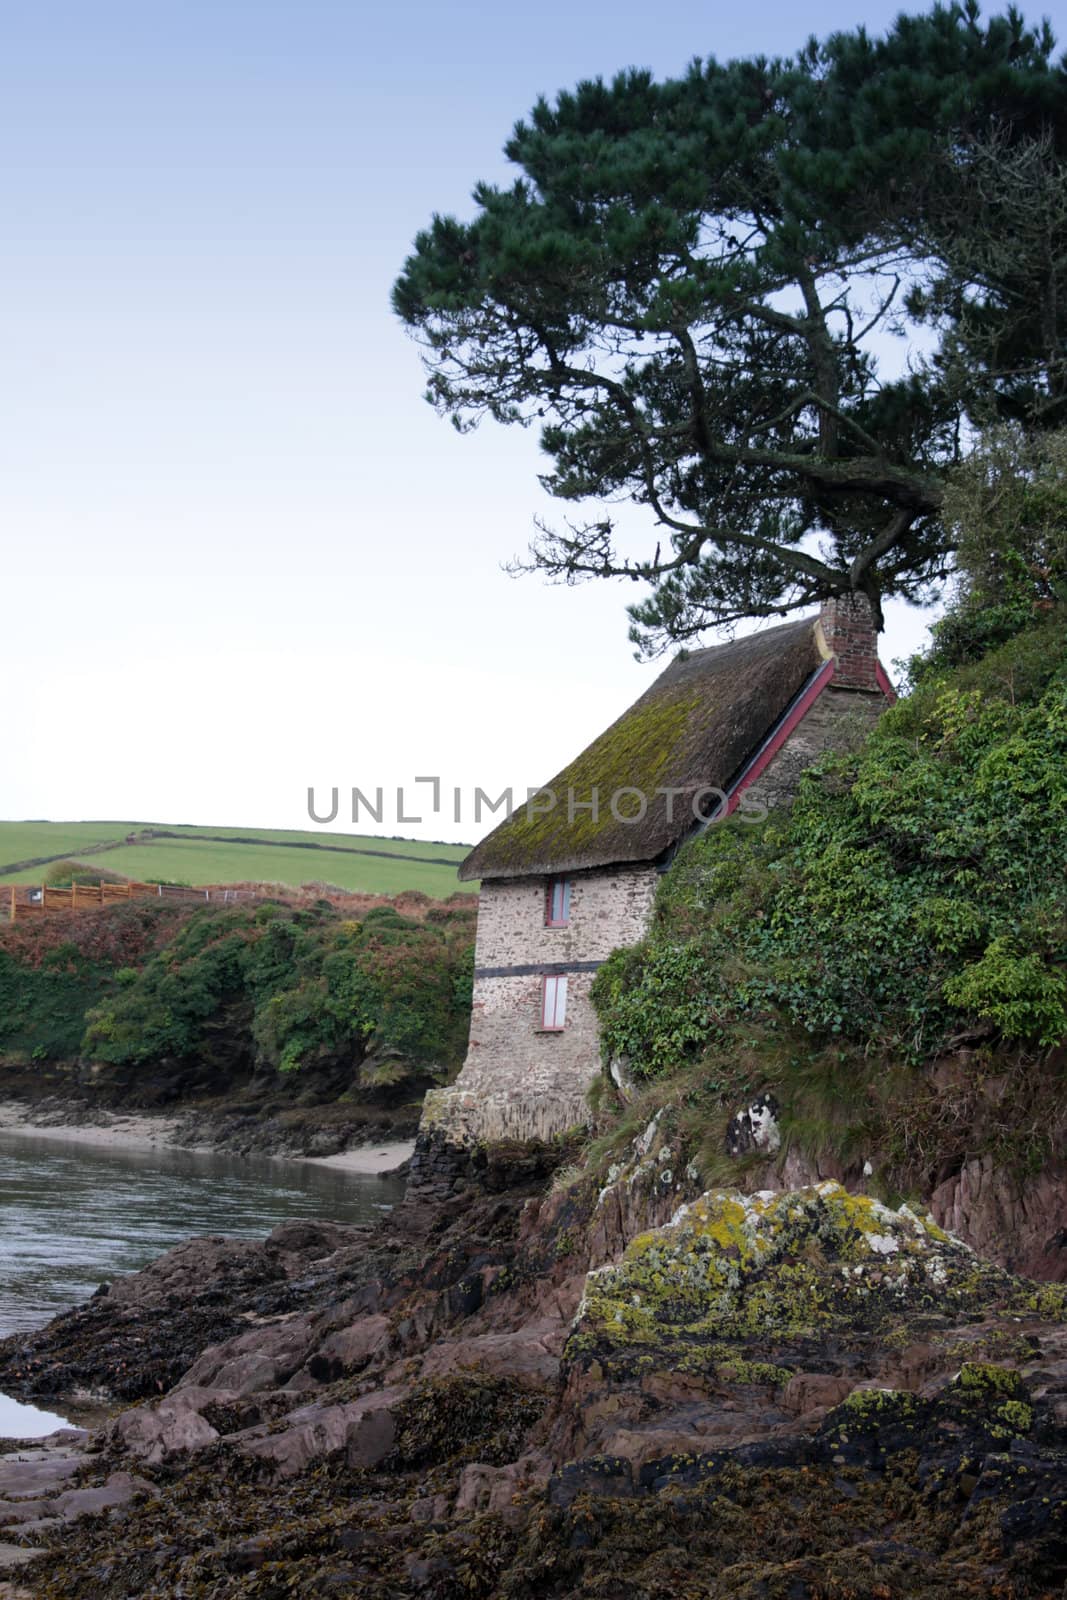 A rural thatched country cottage located next to the river seven esturay at Bantham in Devon.